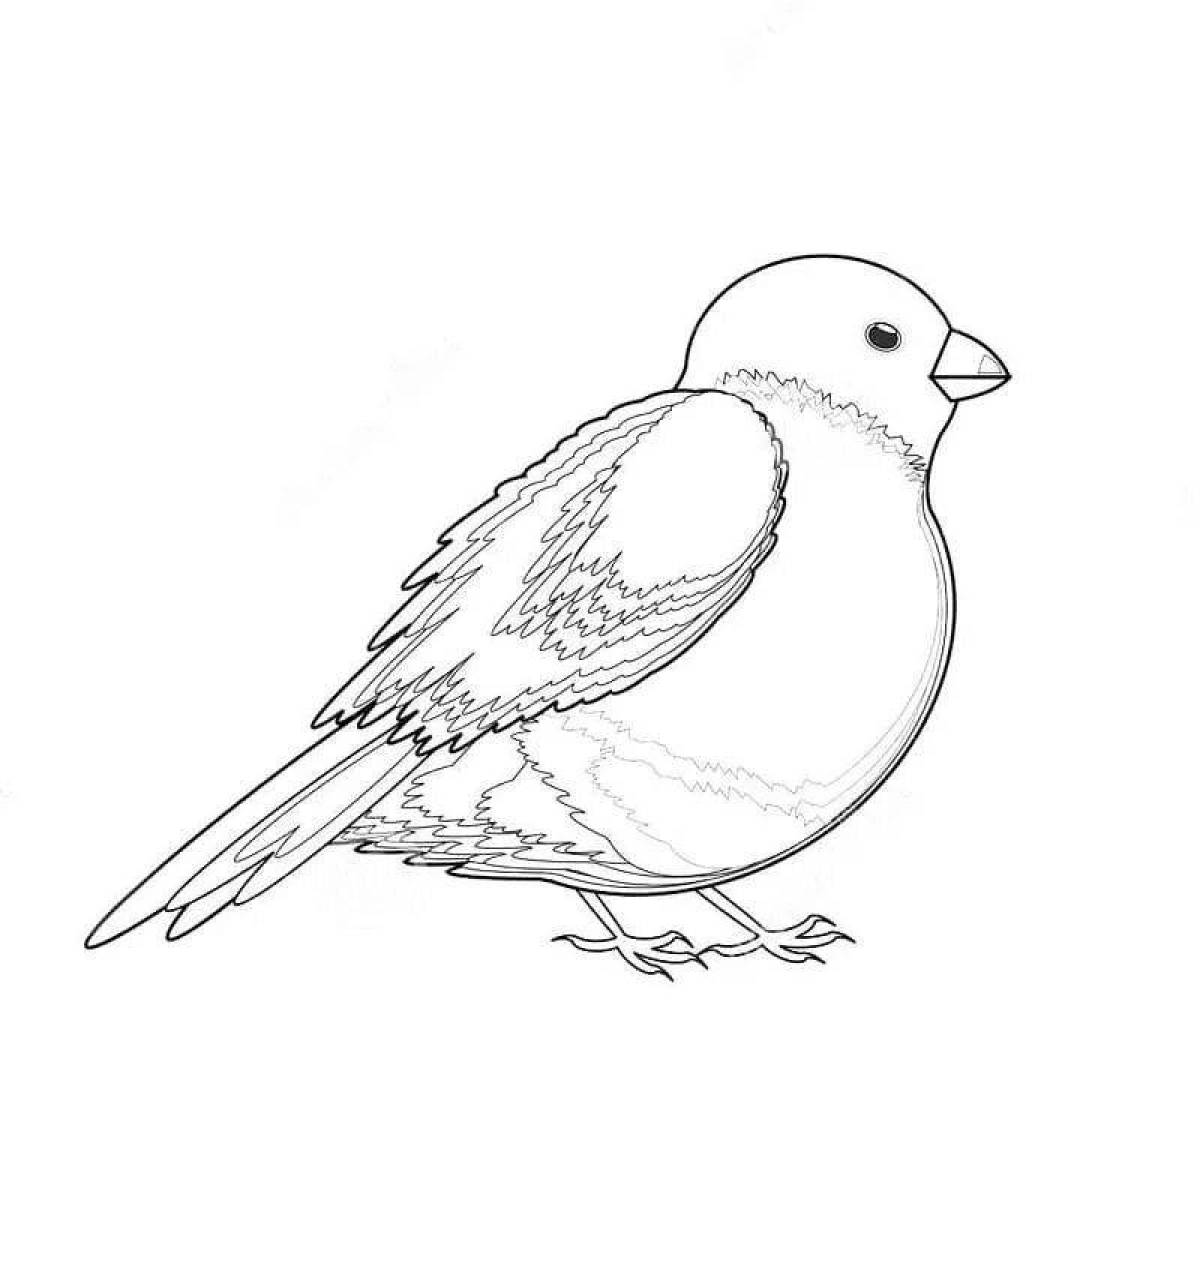 Coloring book cheerful bullfinch for children